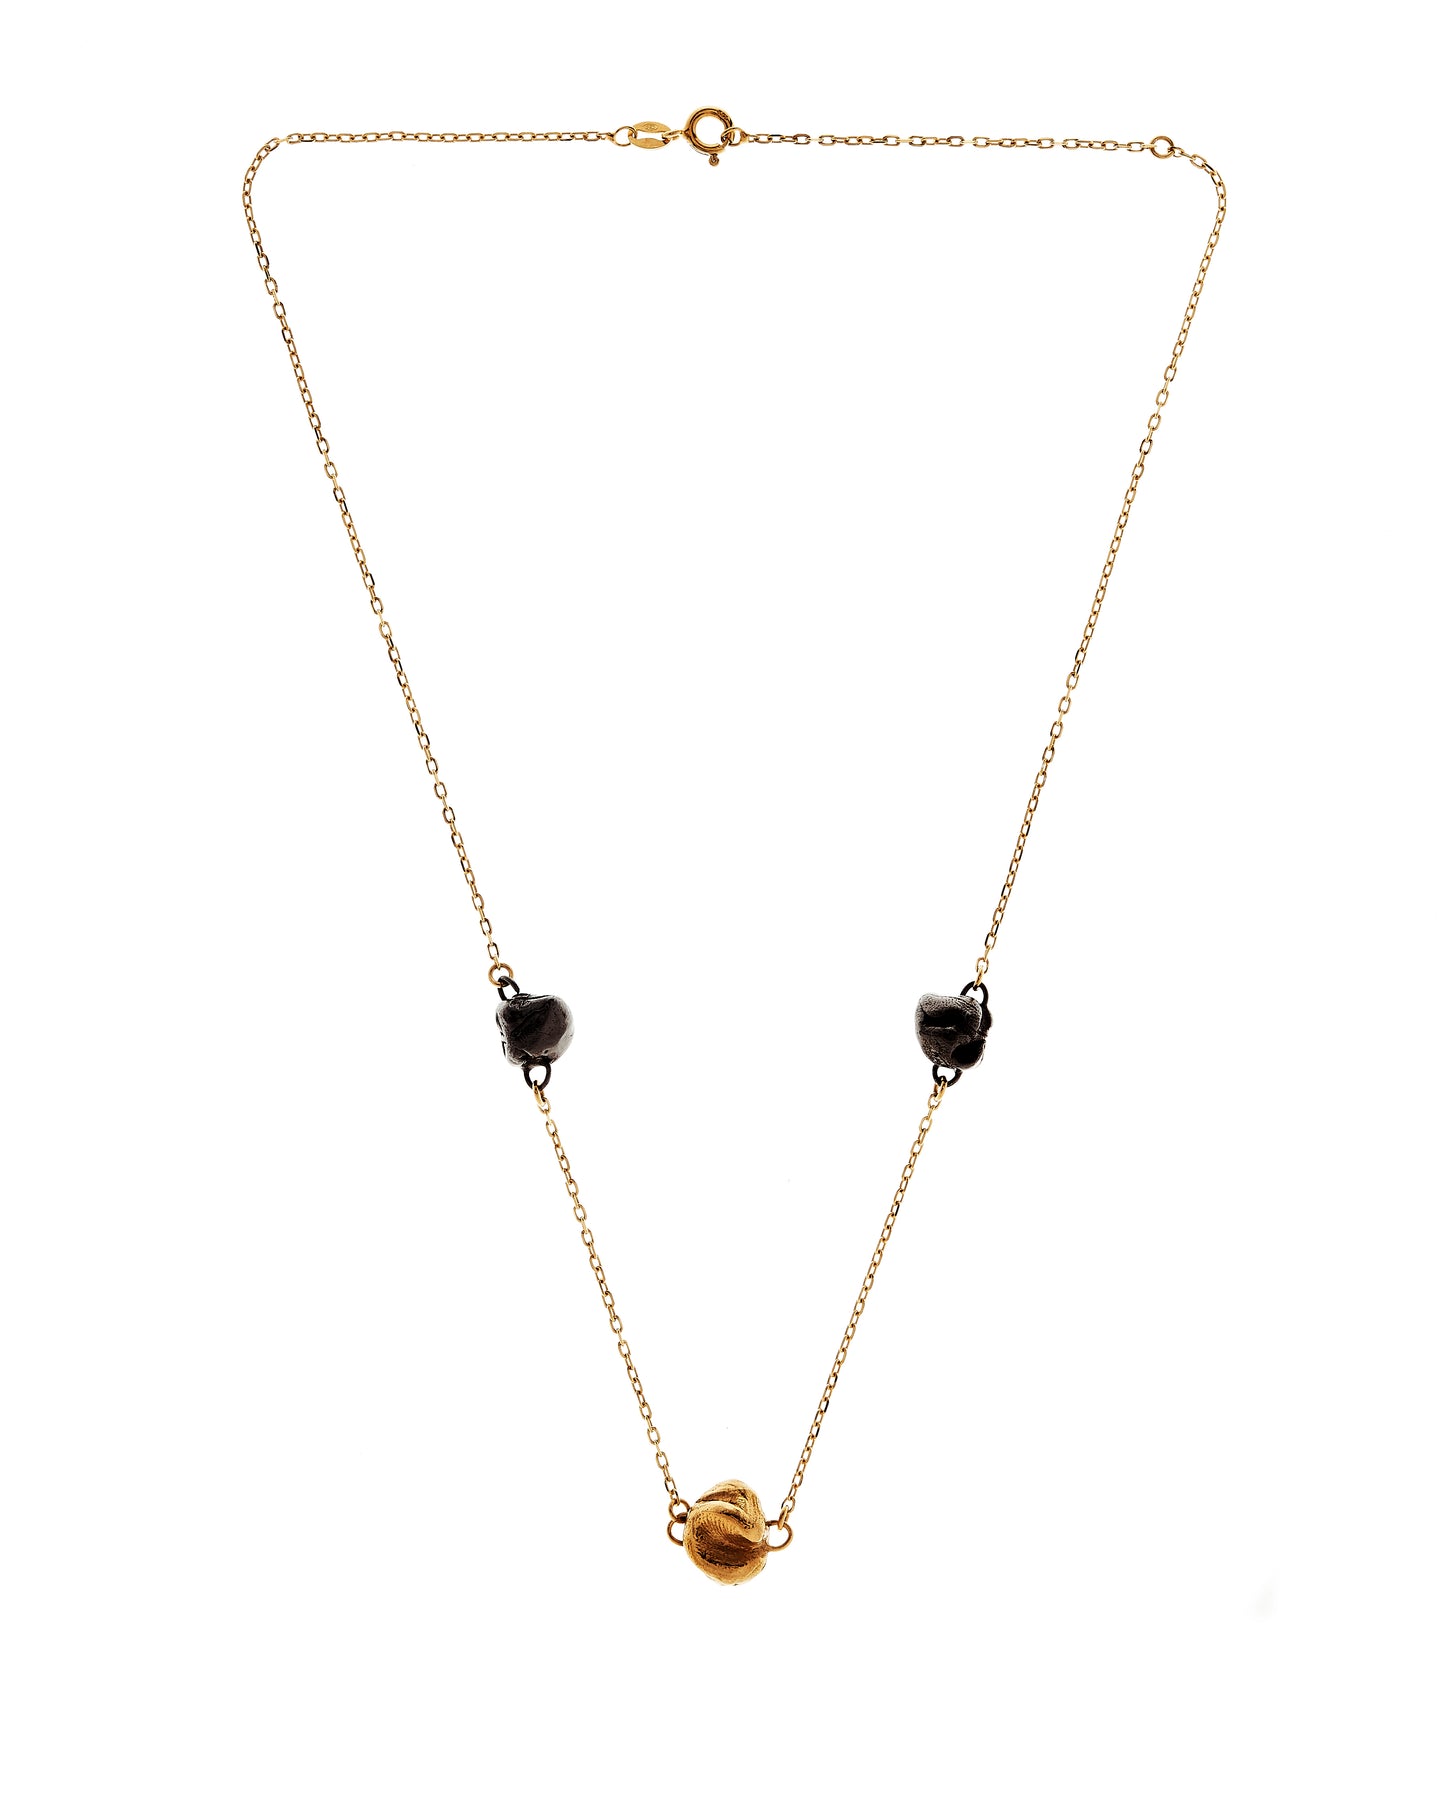 Delicated chain necklace with gold and black rhodium